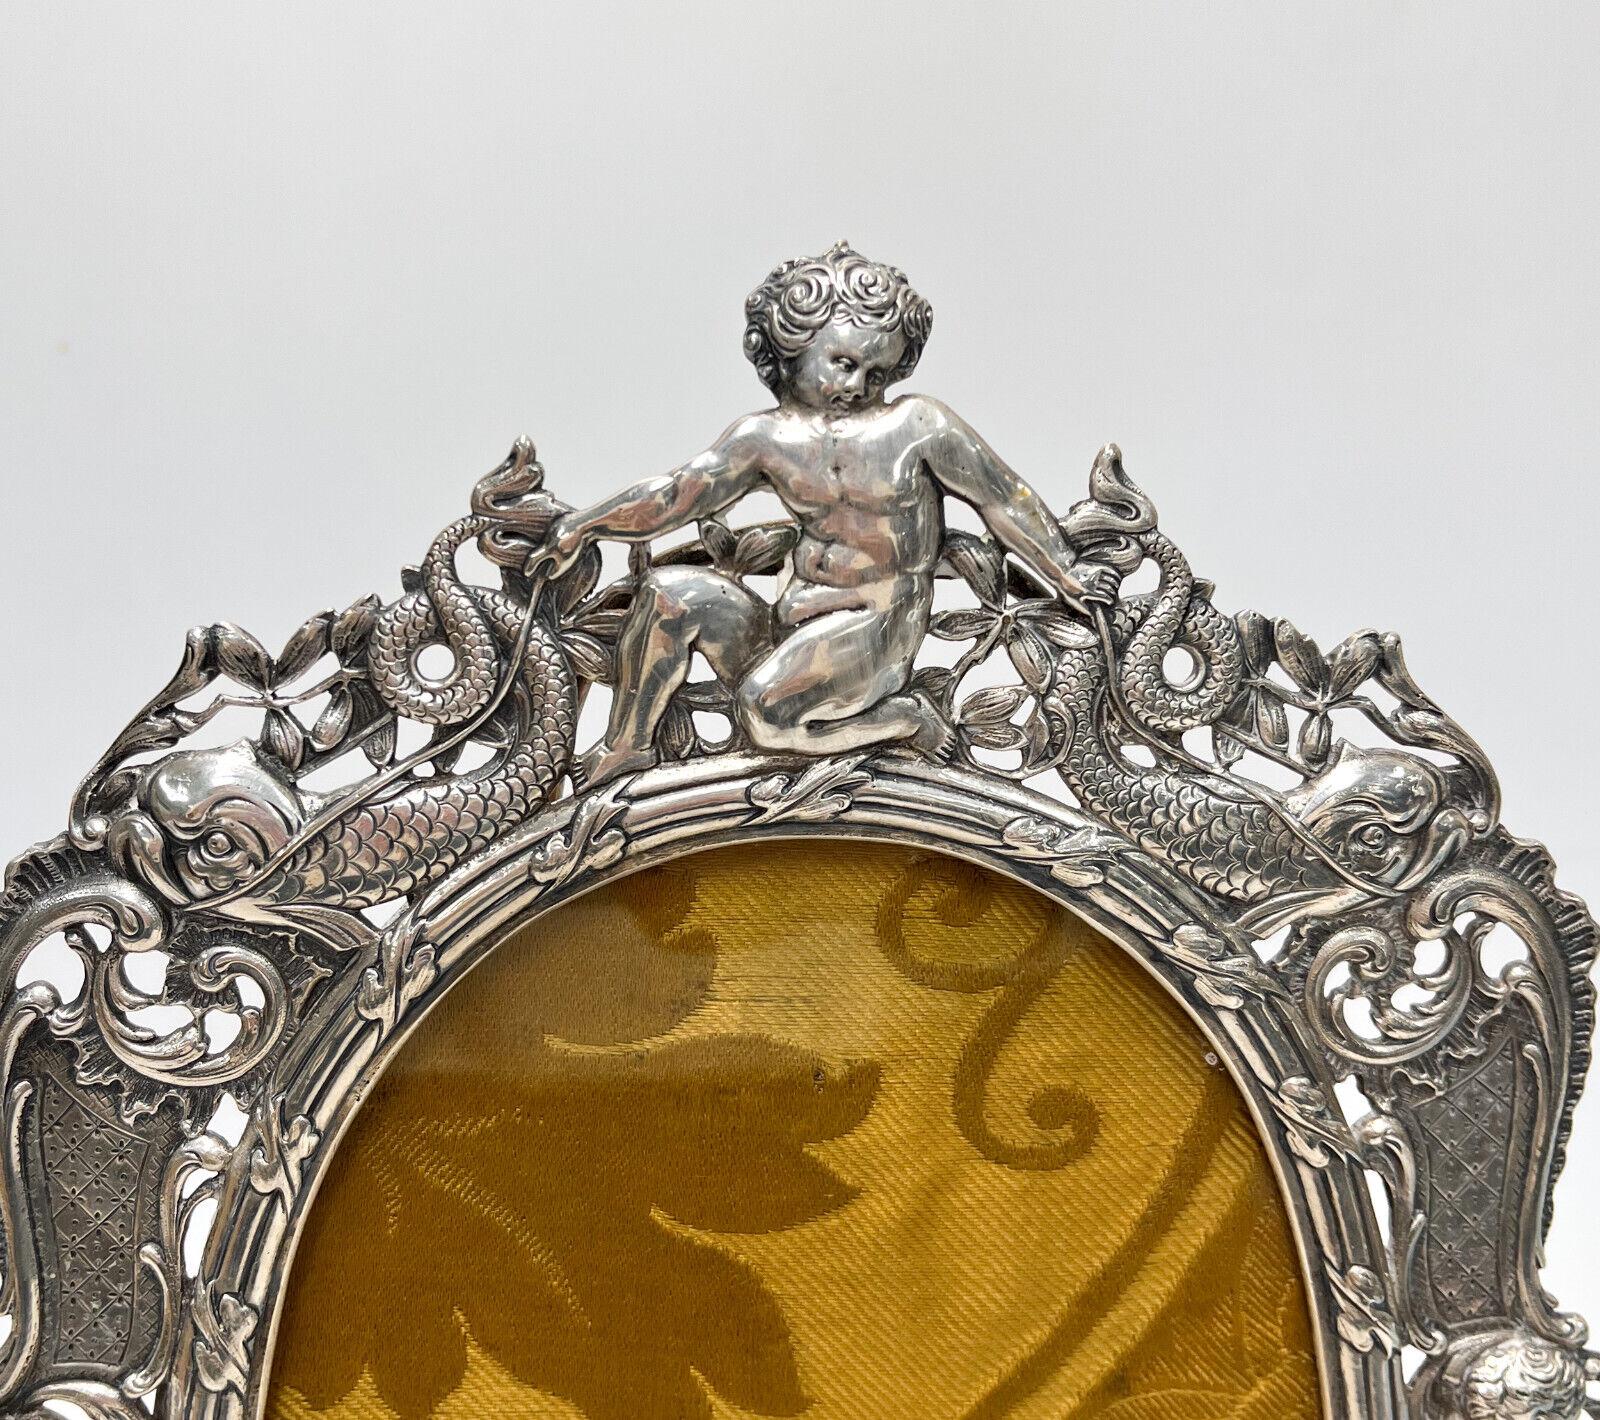 Continental 800 silver pierced cherub photo frame, circa 1900. Repousse figural cherubs with dolphin and foliate swag decoration. Unmarked, but tests for around 80% silver. Gold fabric backing. Likely Italian.

Additional Information: 
Weight